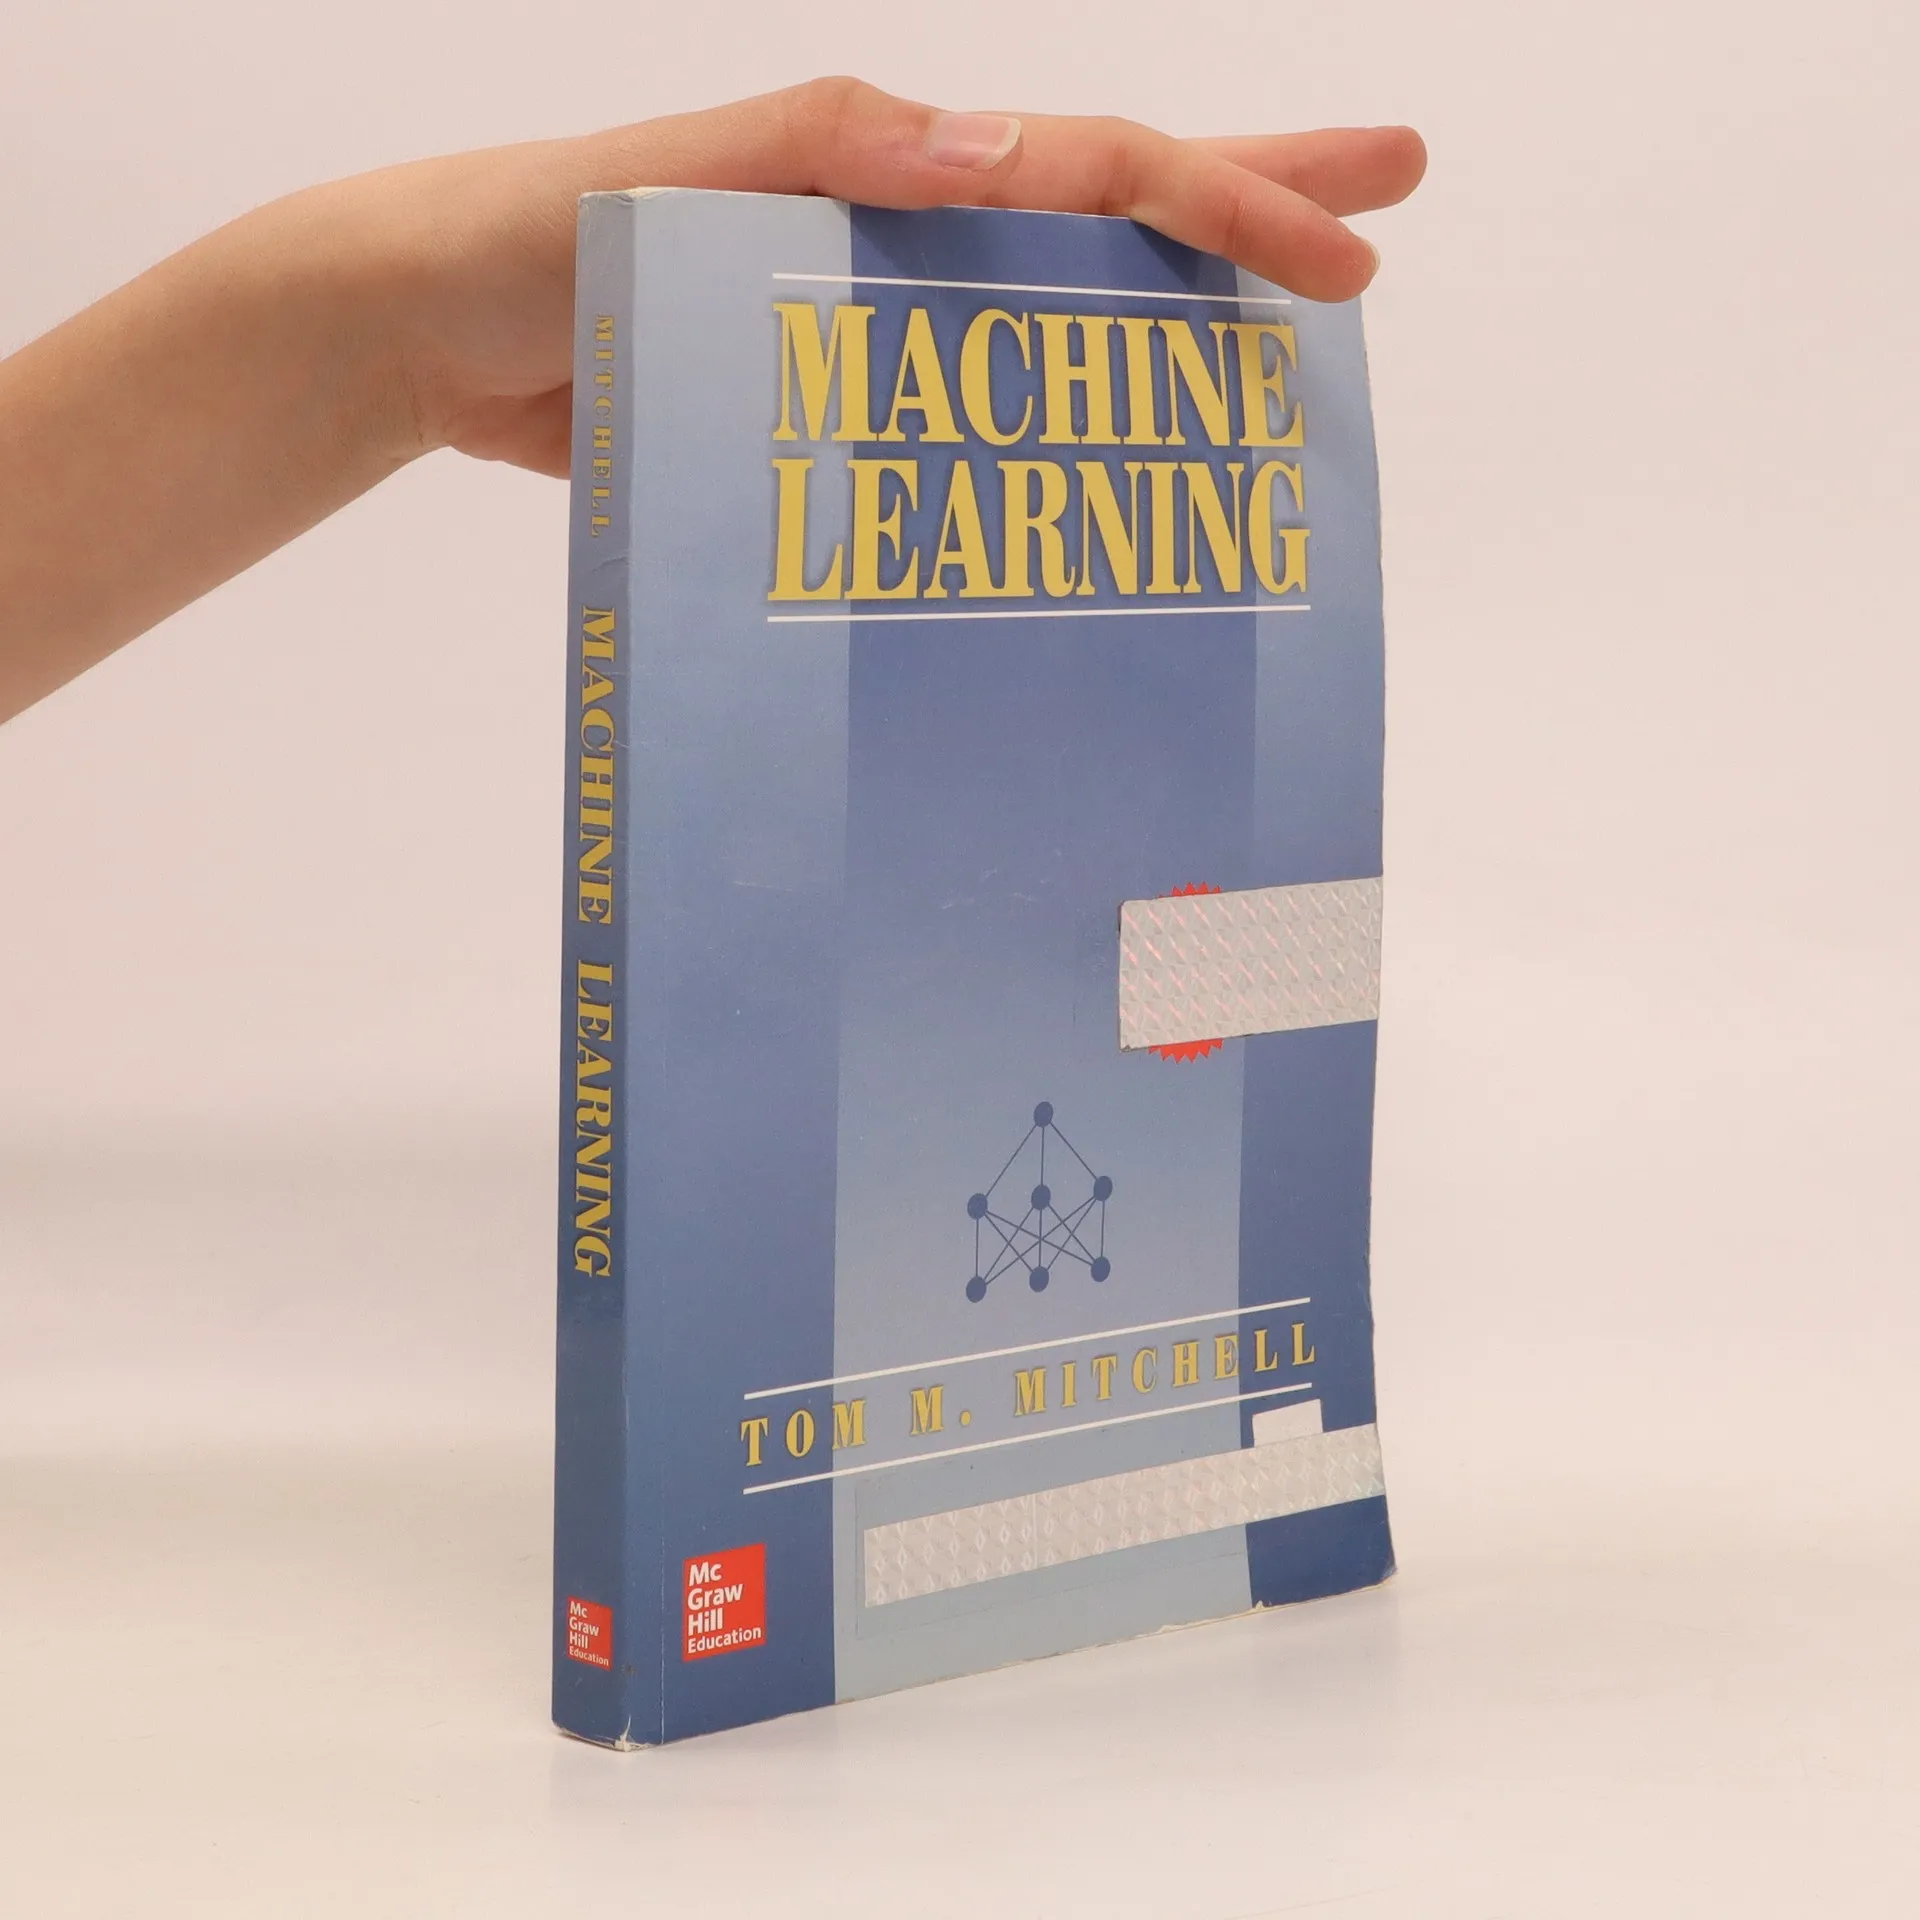 Machine Learning??by Mitchell Tom M.